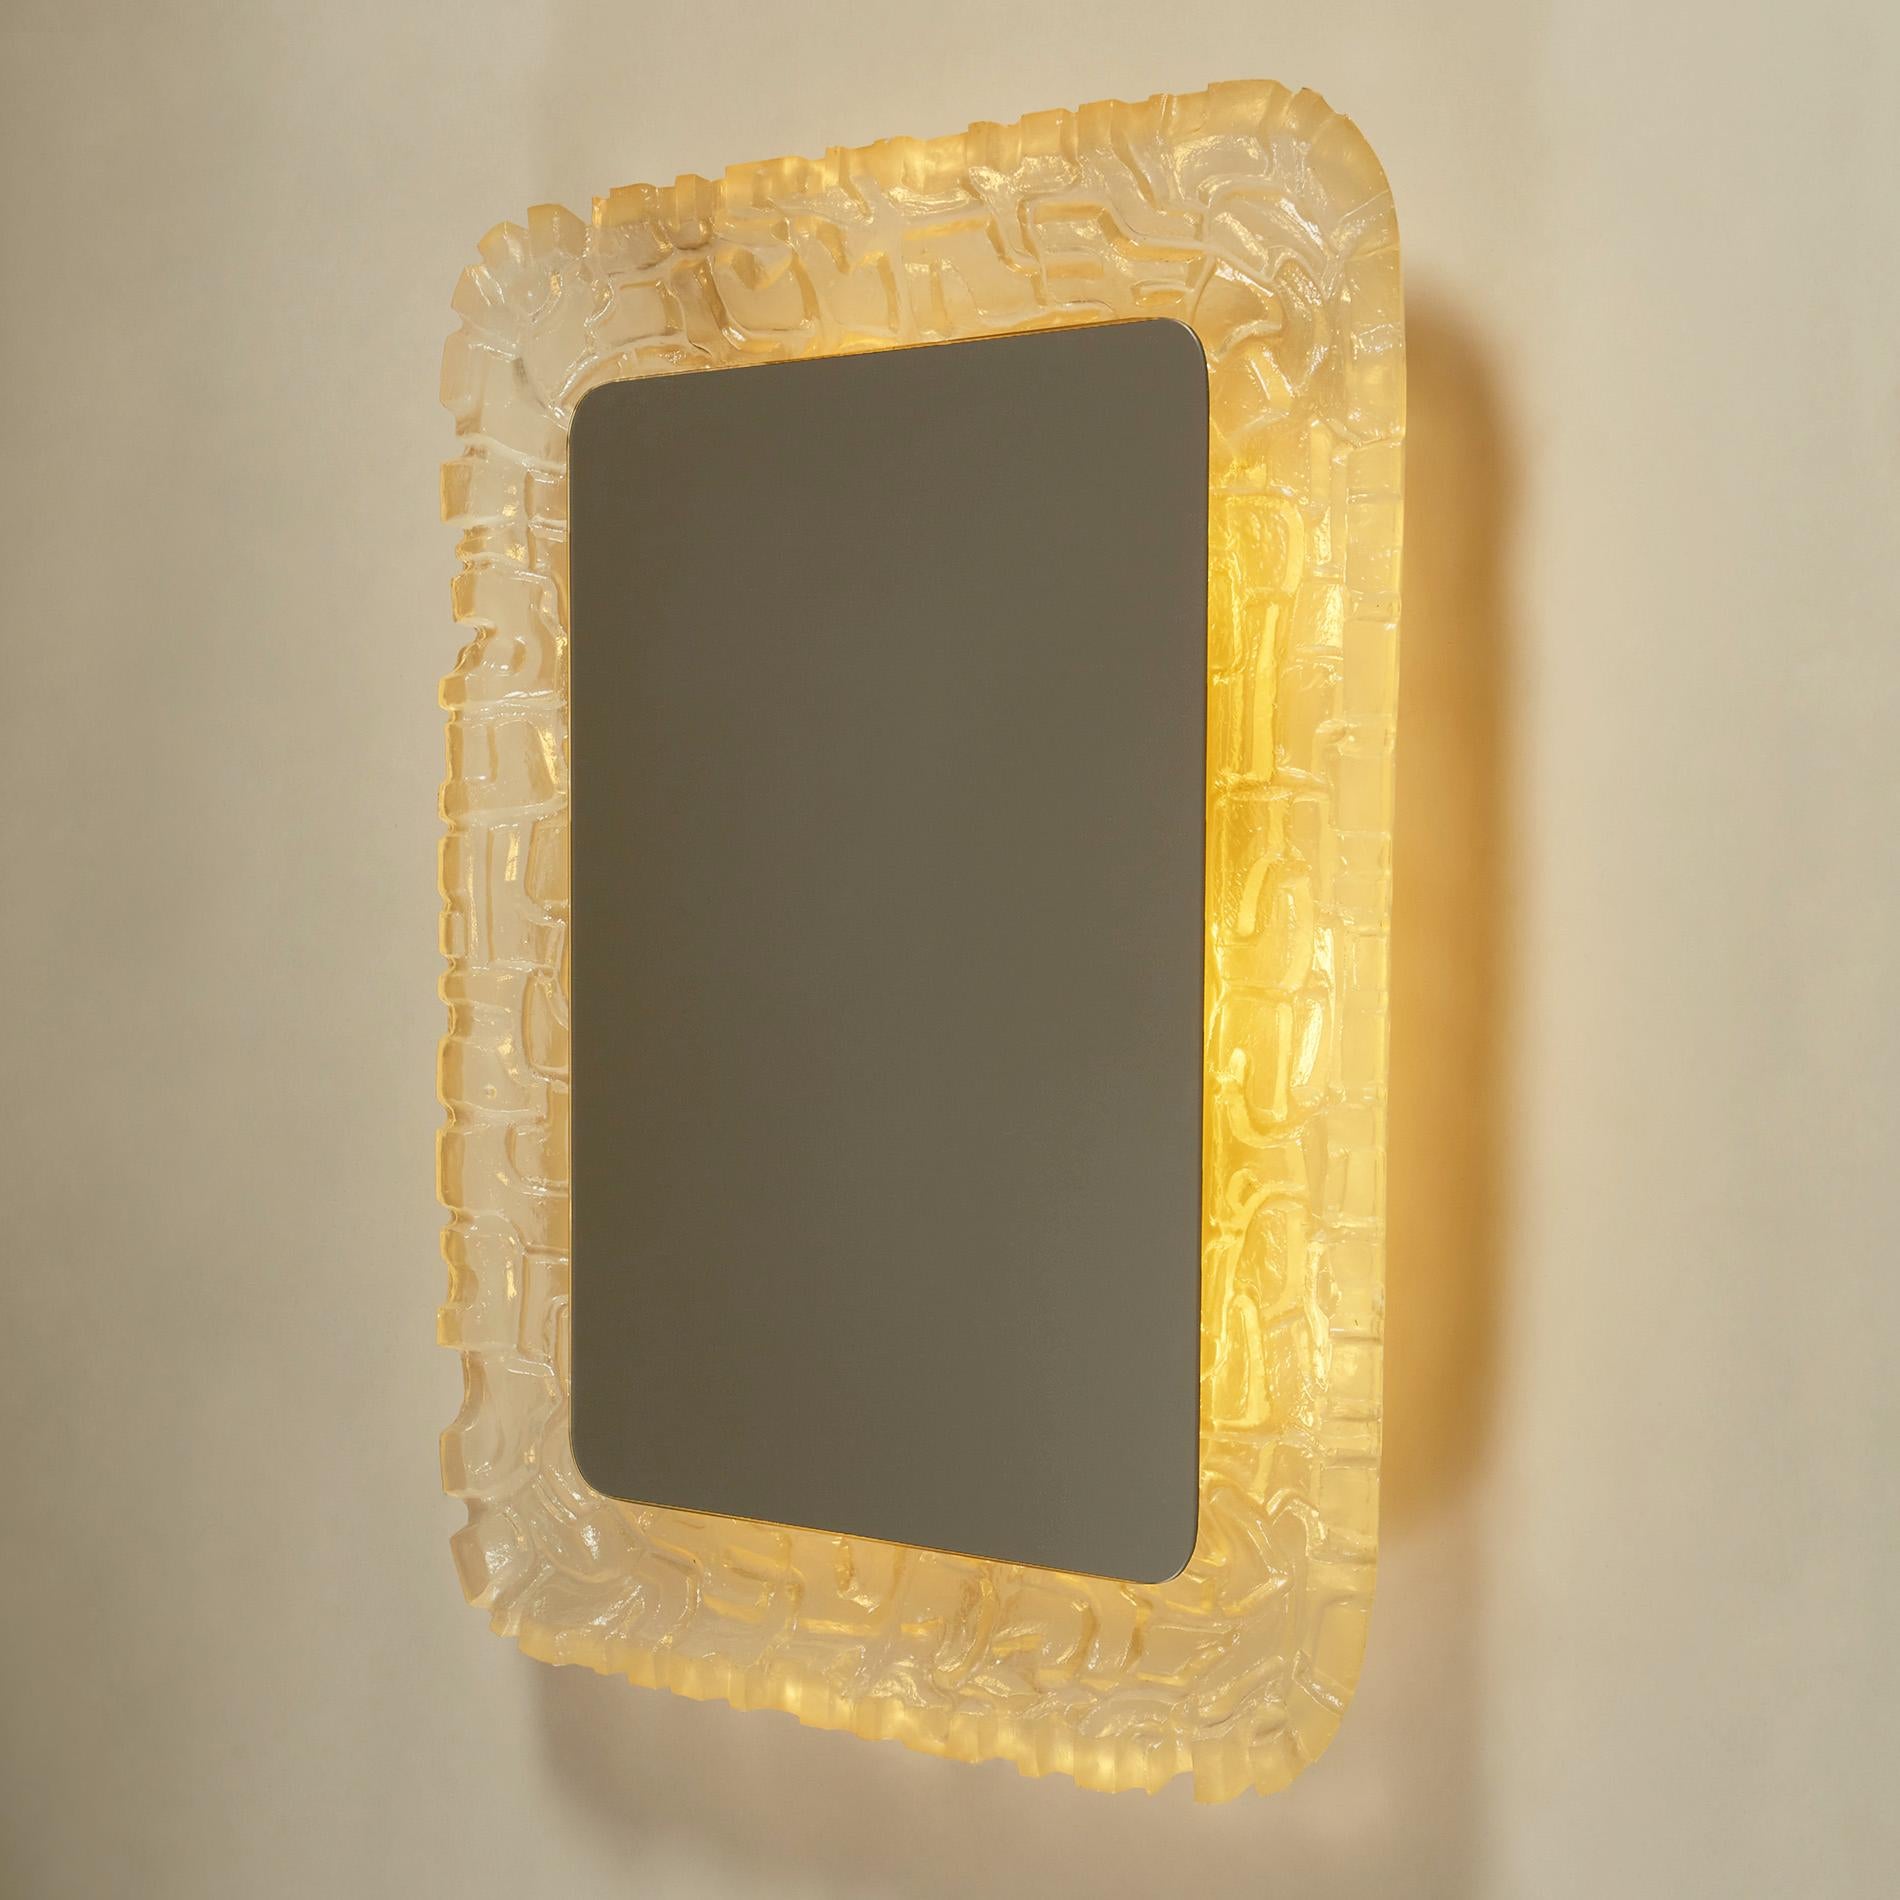 Unusual rectangular mirror with back lighting. The concave frame sculpted in irregular cubes of glowing cool resin.